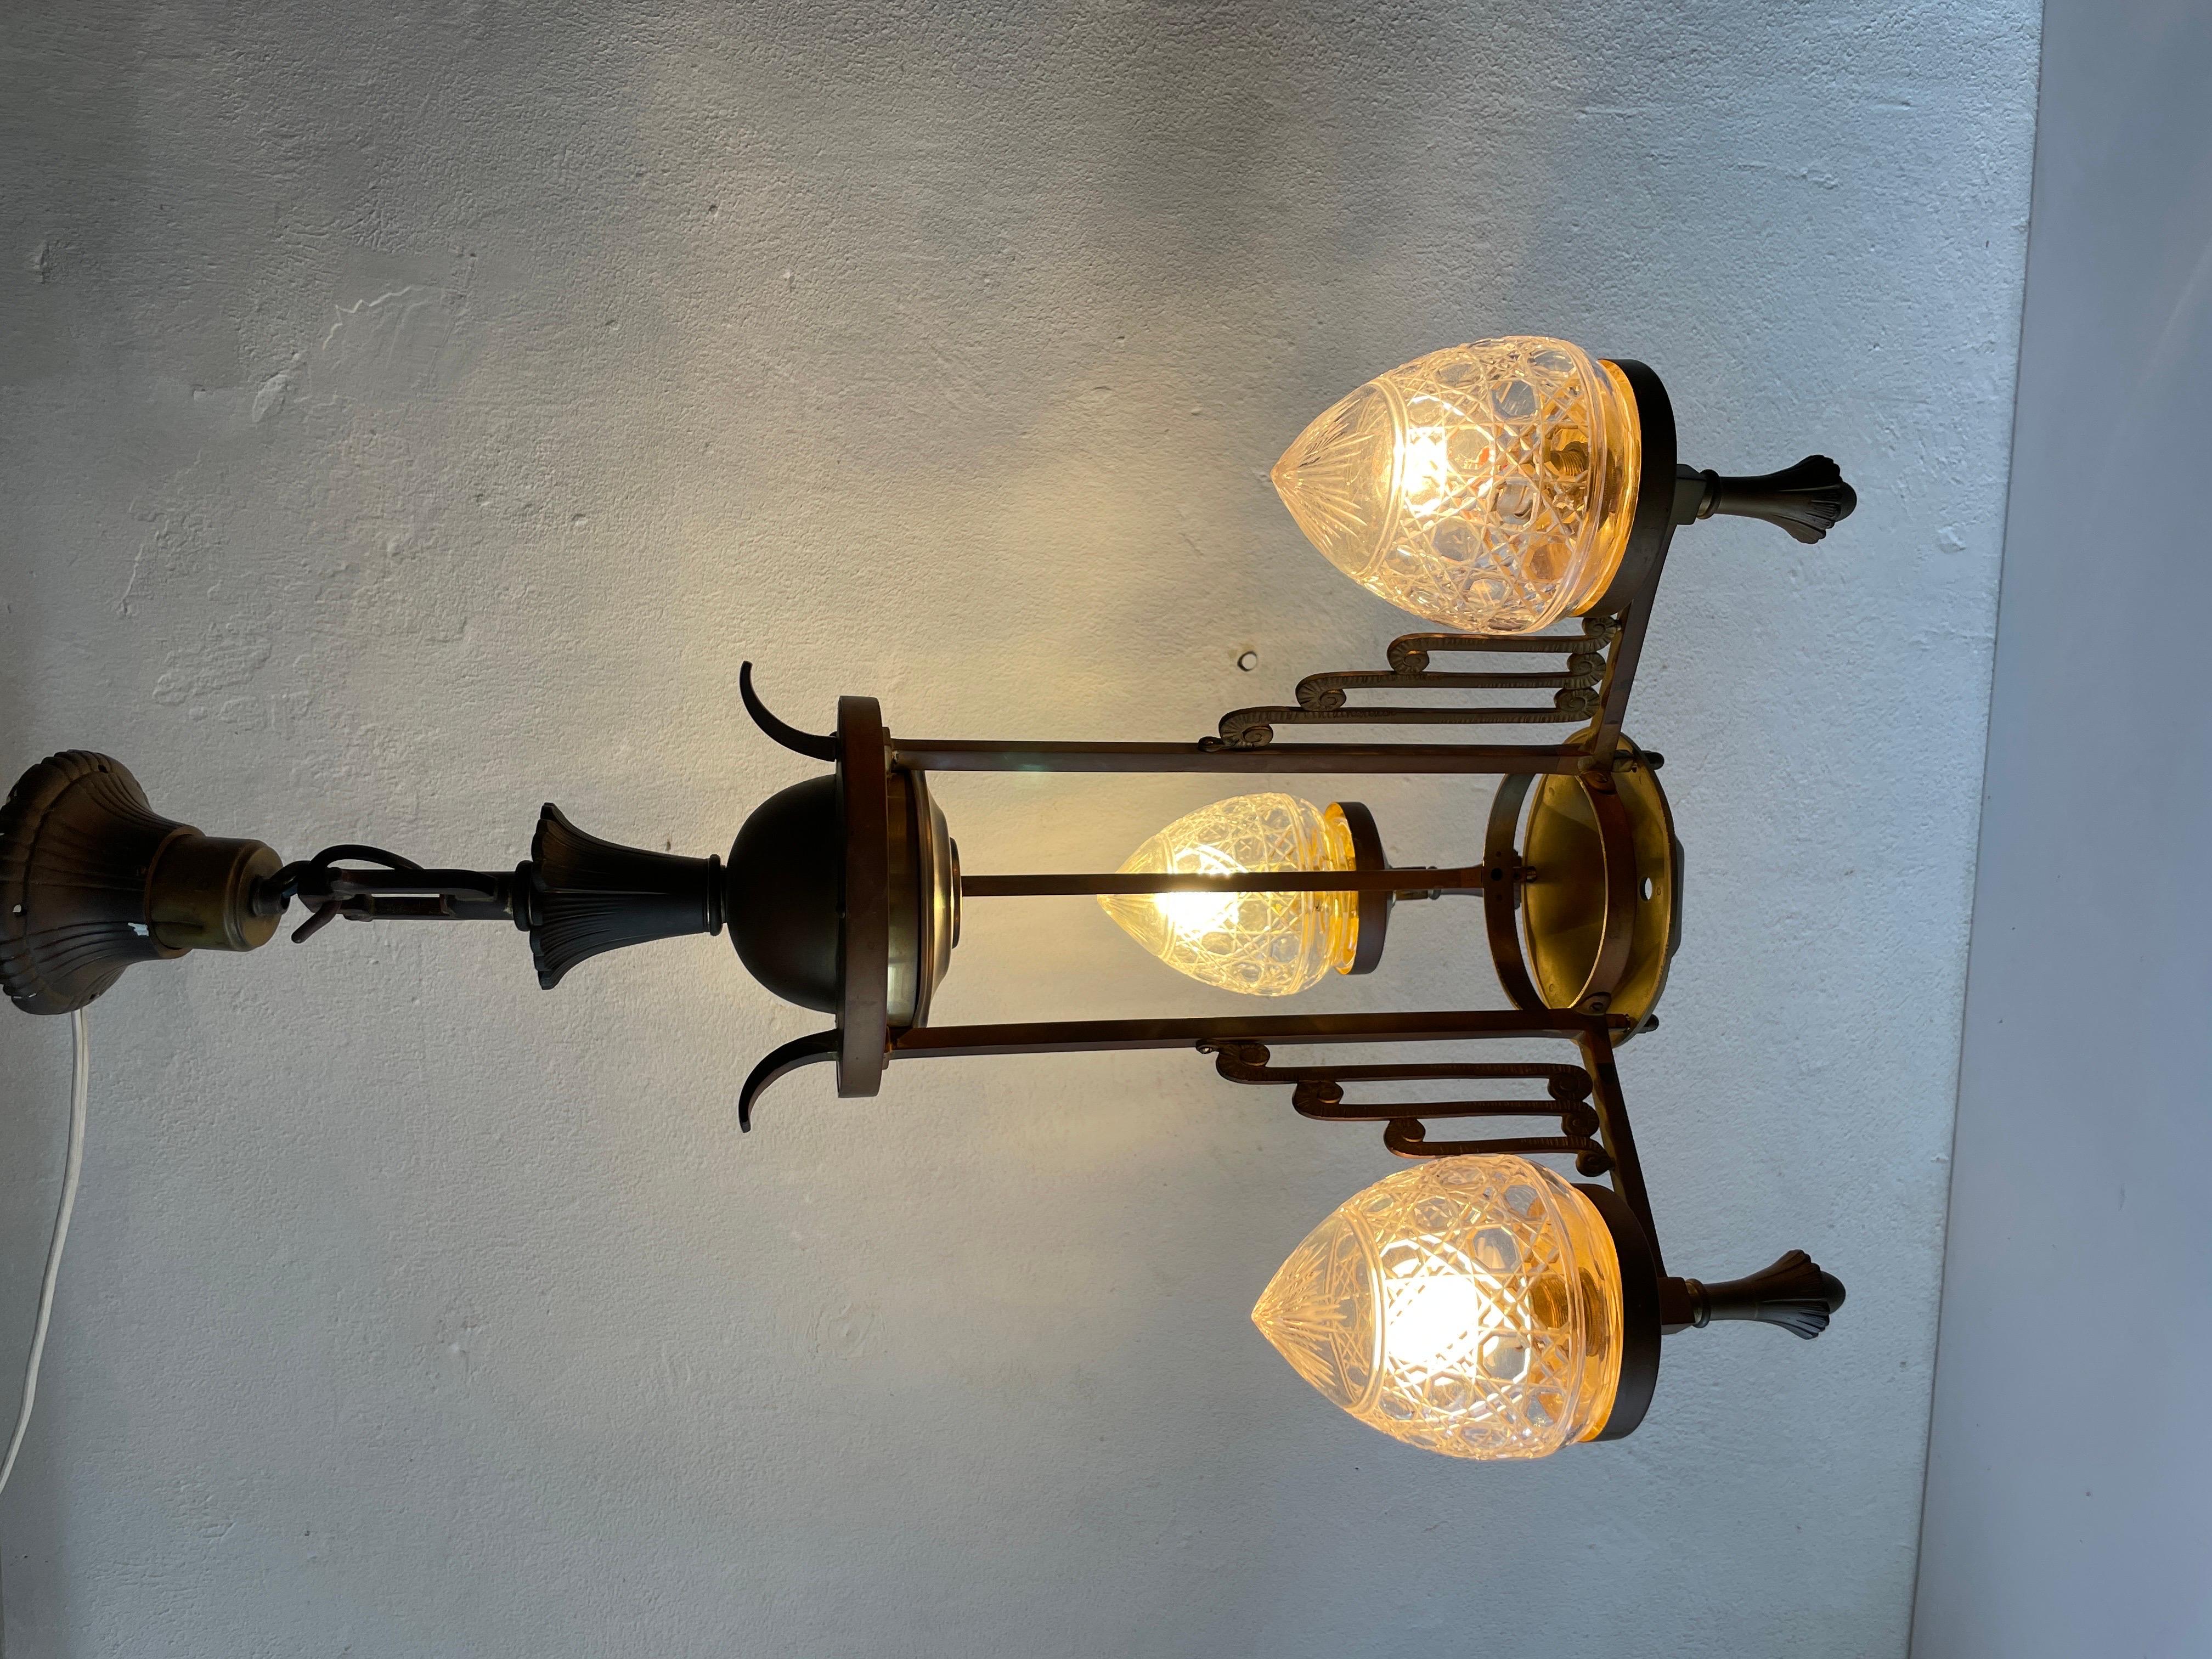 Unique French Copper Architectural Body Chandelier, 1940s, France For Sale 5